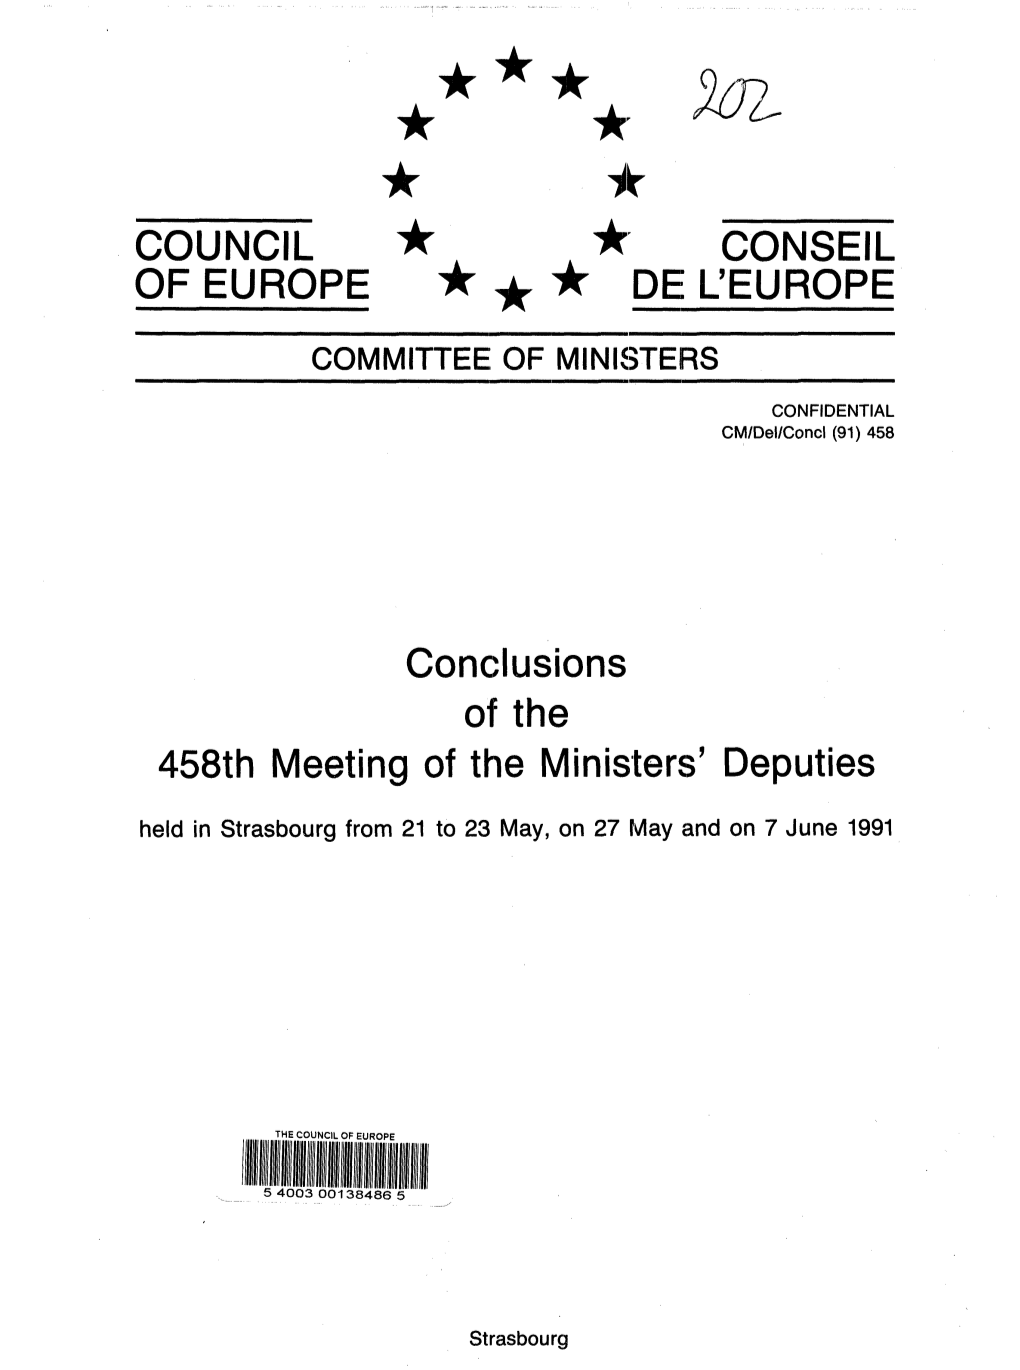 COUNCIL of EUROPE CONSEIL DE L'europe COMMITTEE of MINISTERS CONFIDENTIAL CM/Del/Concl(91)